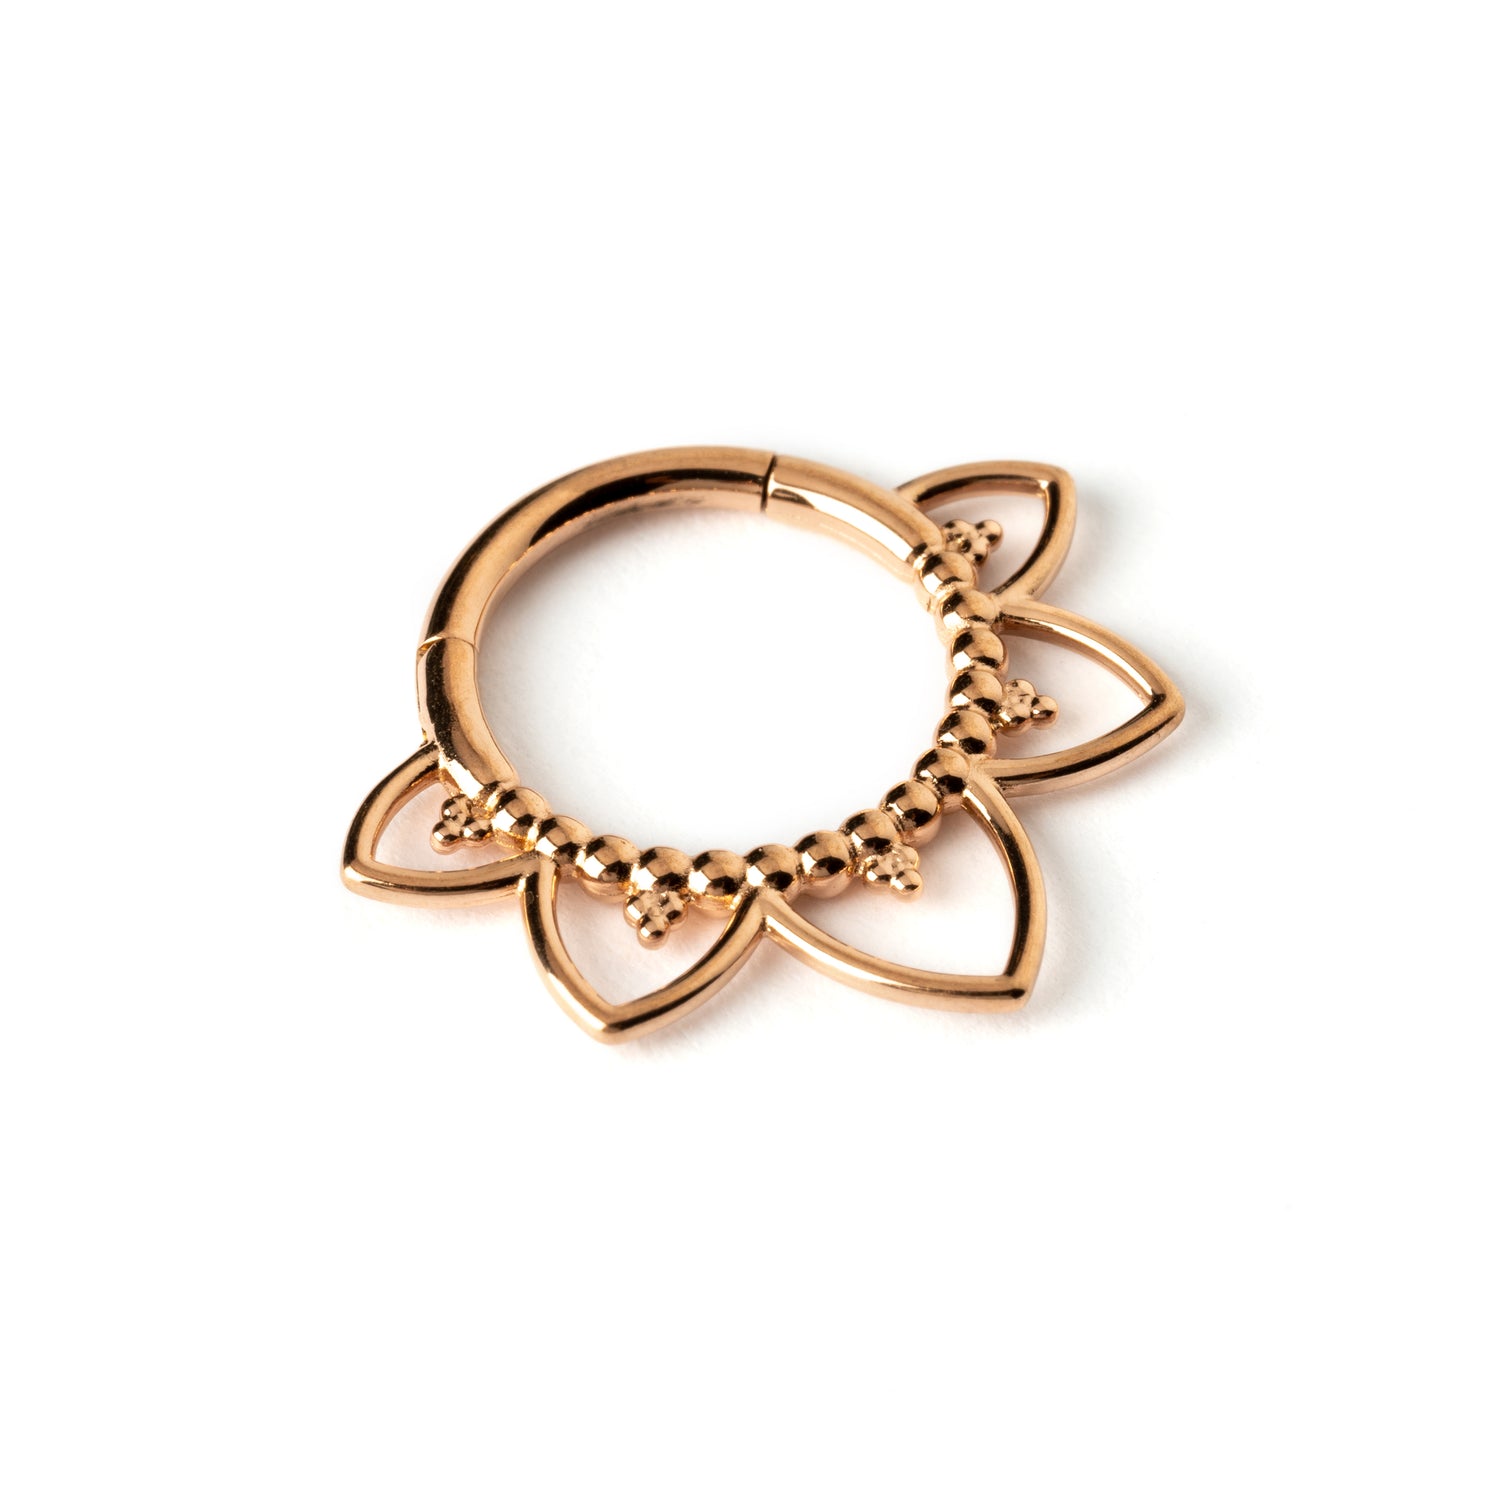 Iryia  rose gold surgical steel open lotus septum clickers left side view